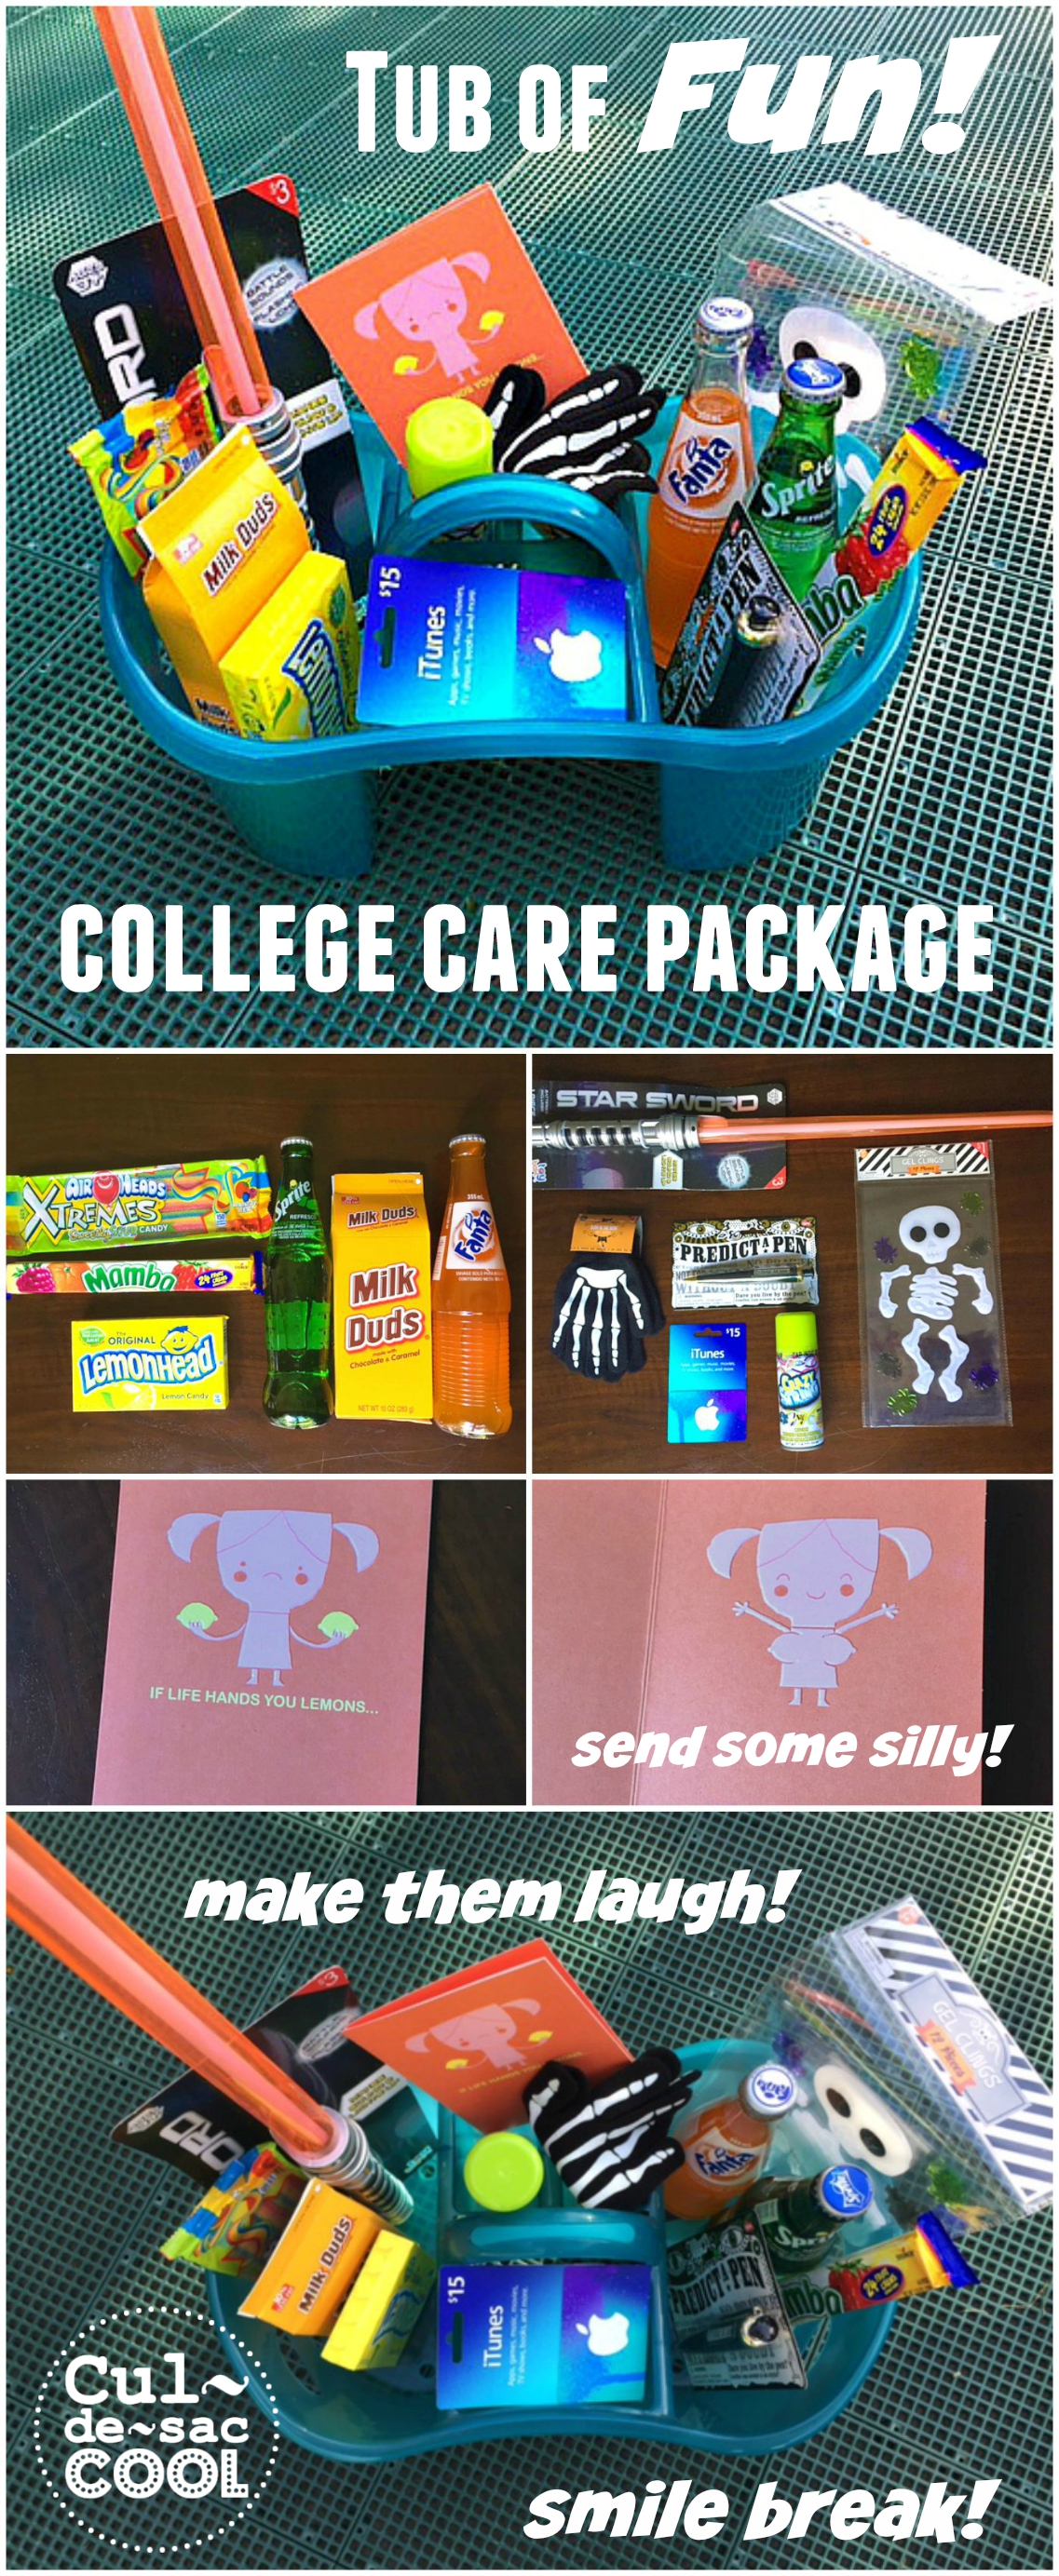 Tub of Fun College Care Package Collage